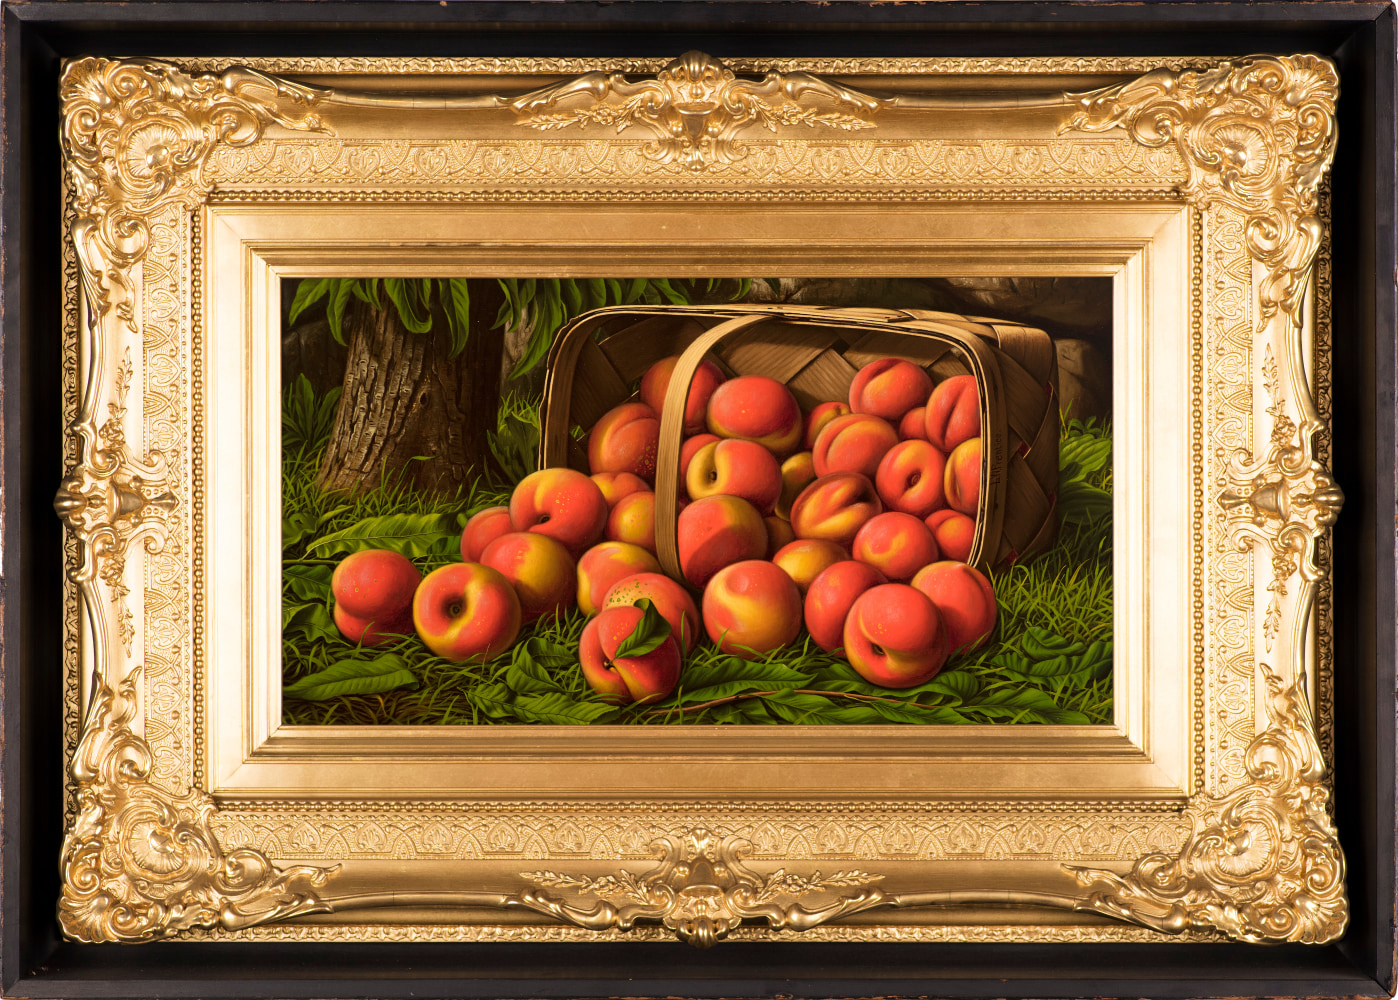 Levi Wells Prentice (1851–1935), Peaches in a Basket Under a Tree, oil on canvas, 12 x 22 in., signed on basket: L. W. Prentice (framed)